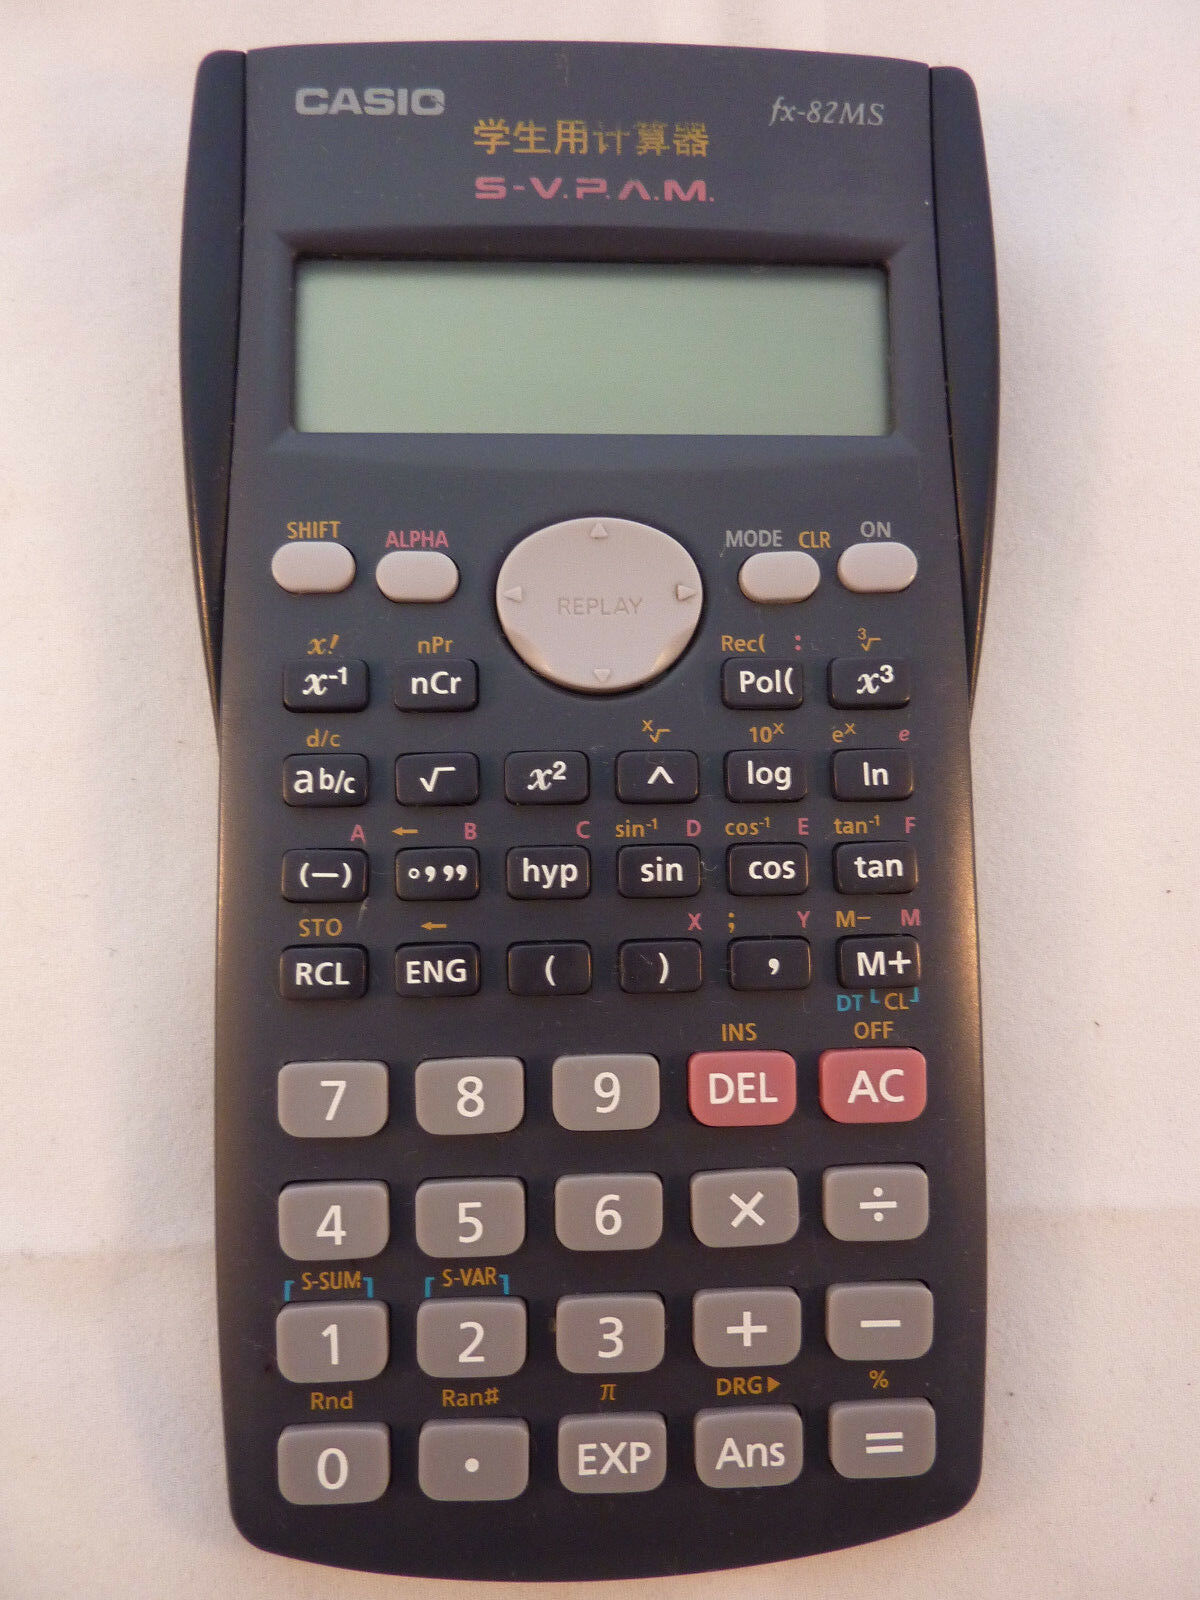 Primary image for Casio FX-82MS Business/Scientific Calculator LN with Instructions